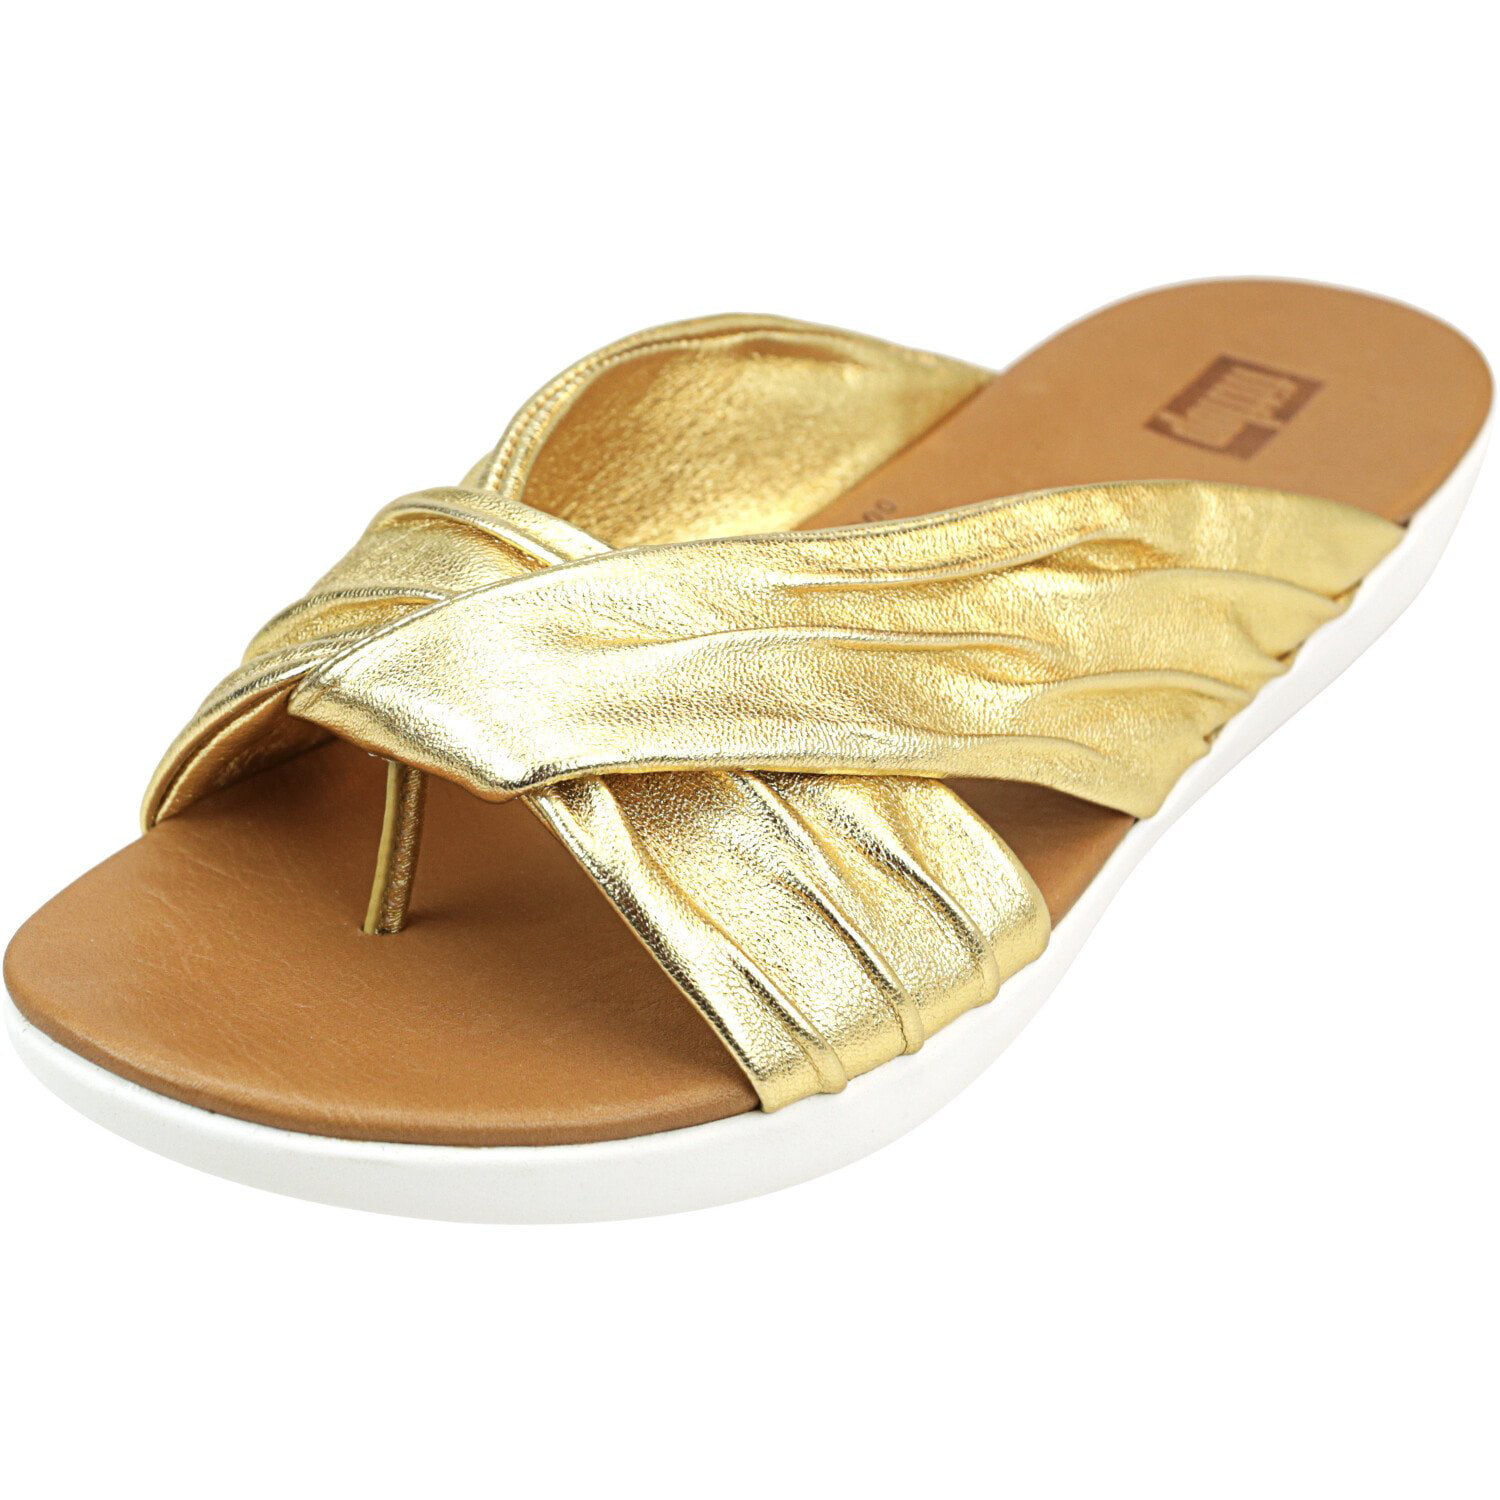 Twine Leather Gold Sandal - 8.5 